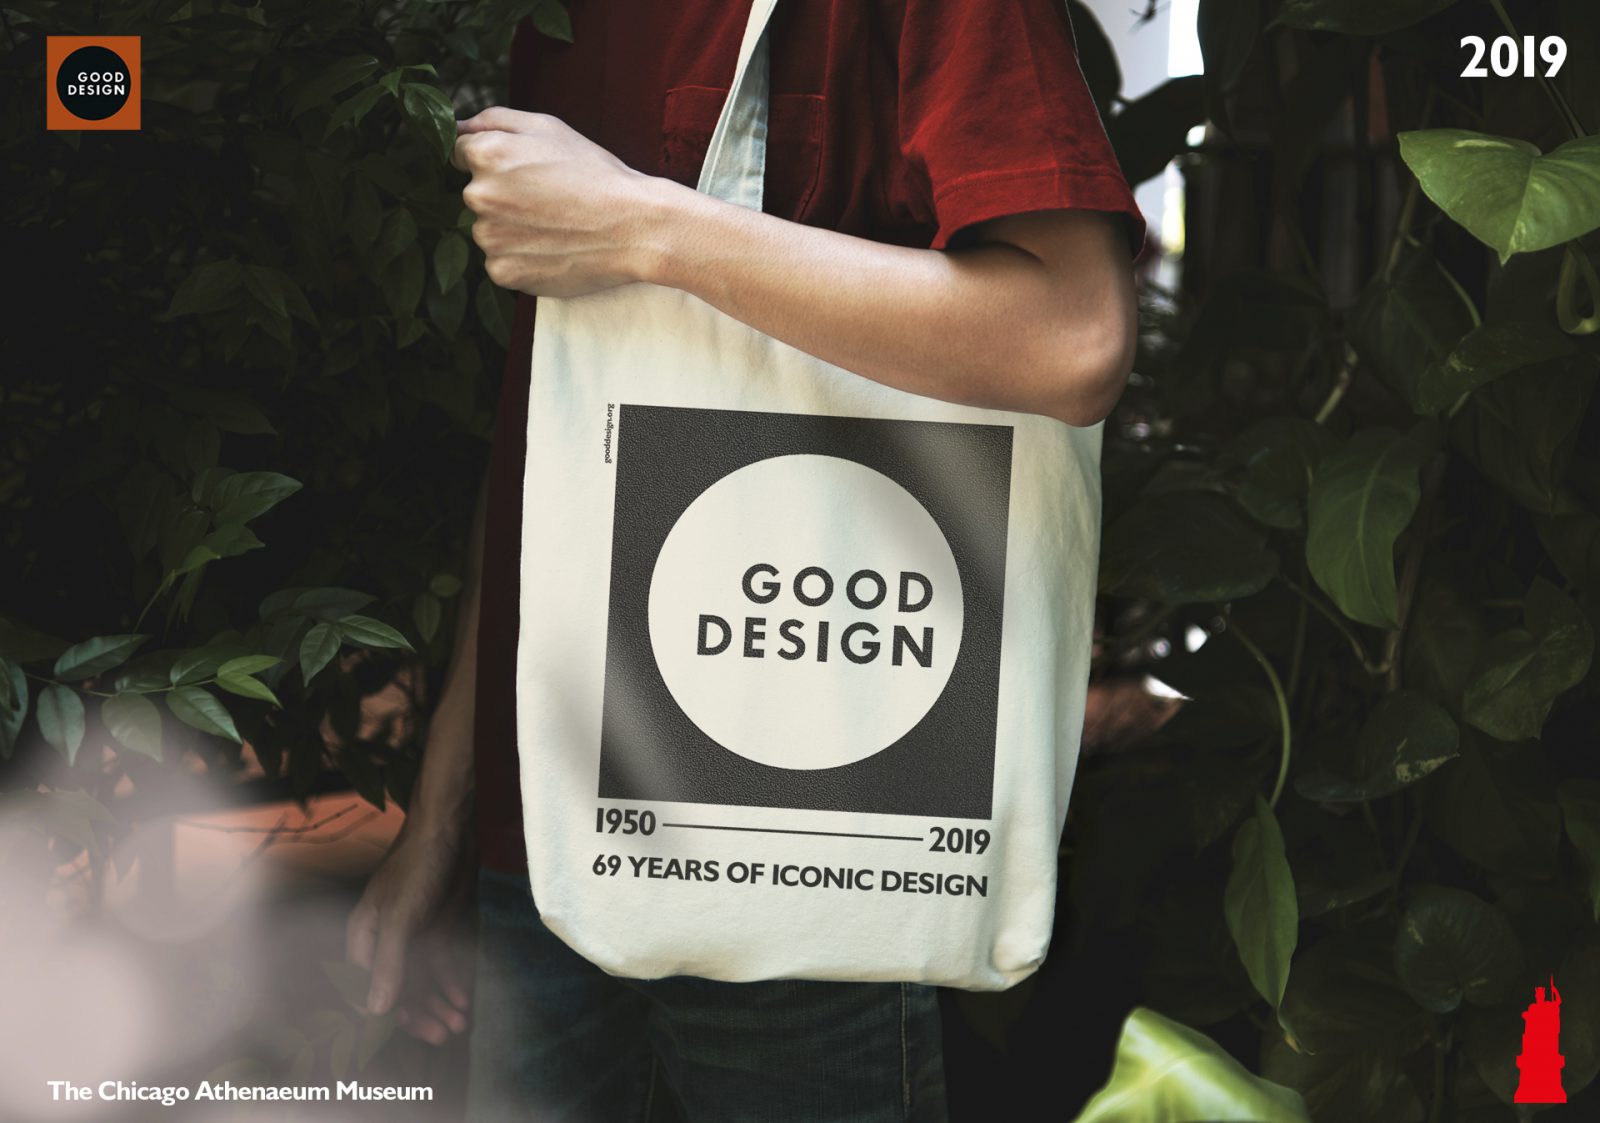 Archisearch GOOD DESIGN AWARDS celebrate 69 Years & run GIVEAWAY for Christmas